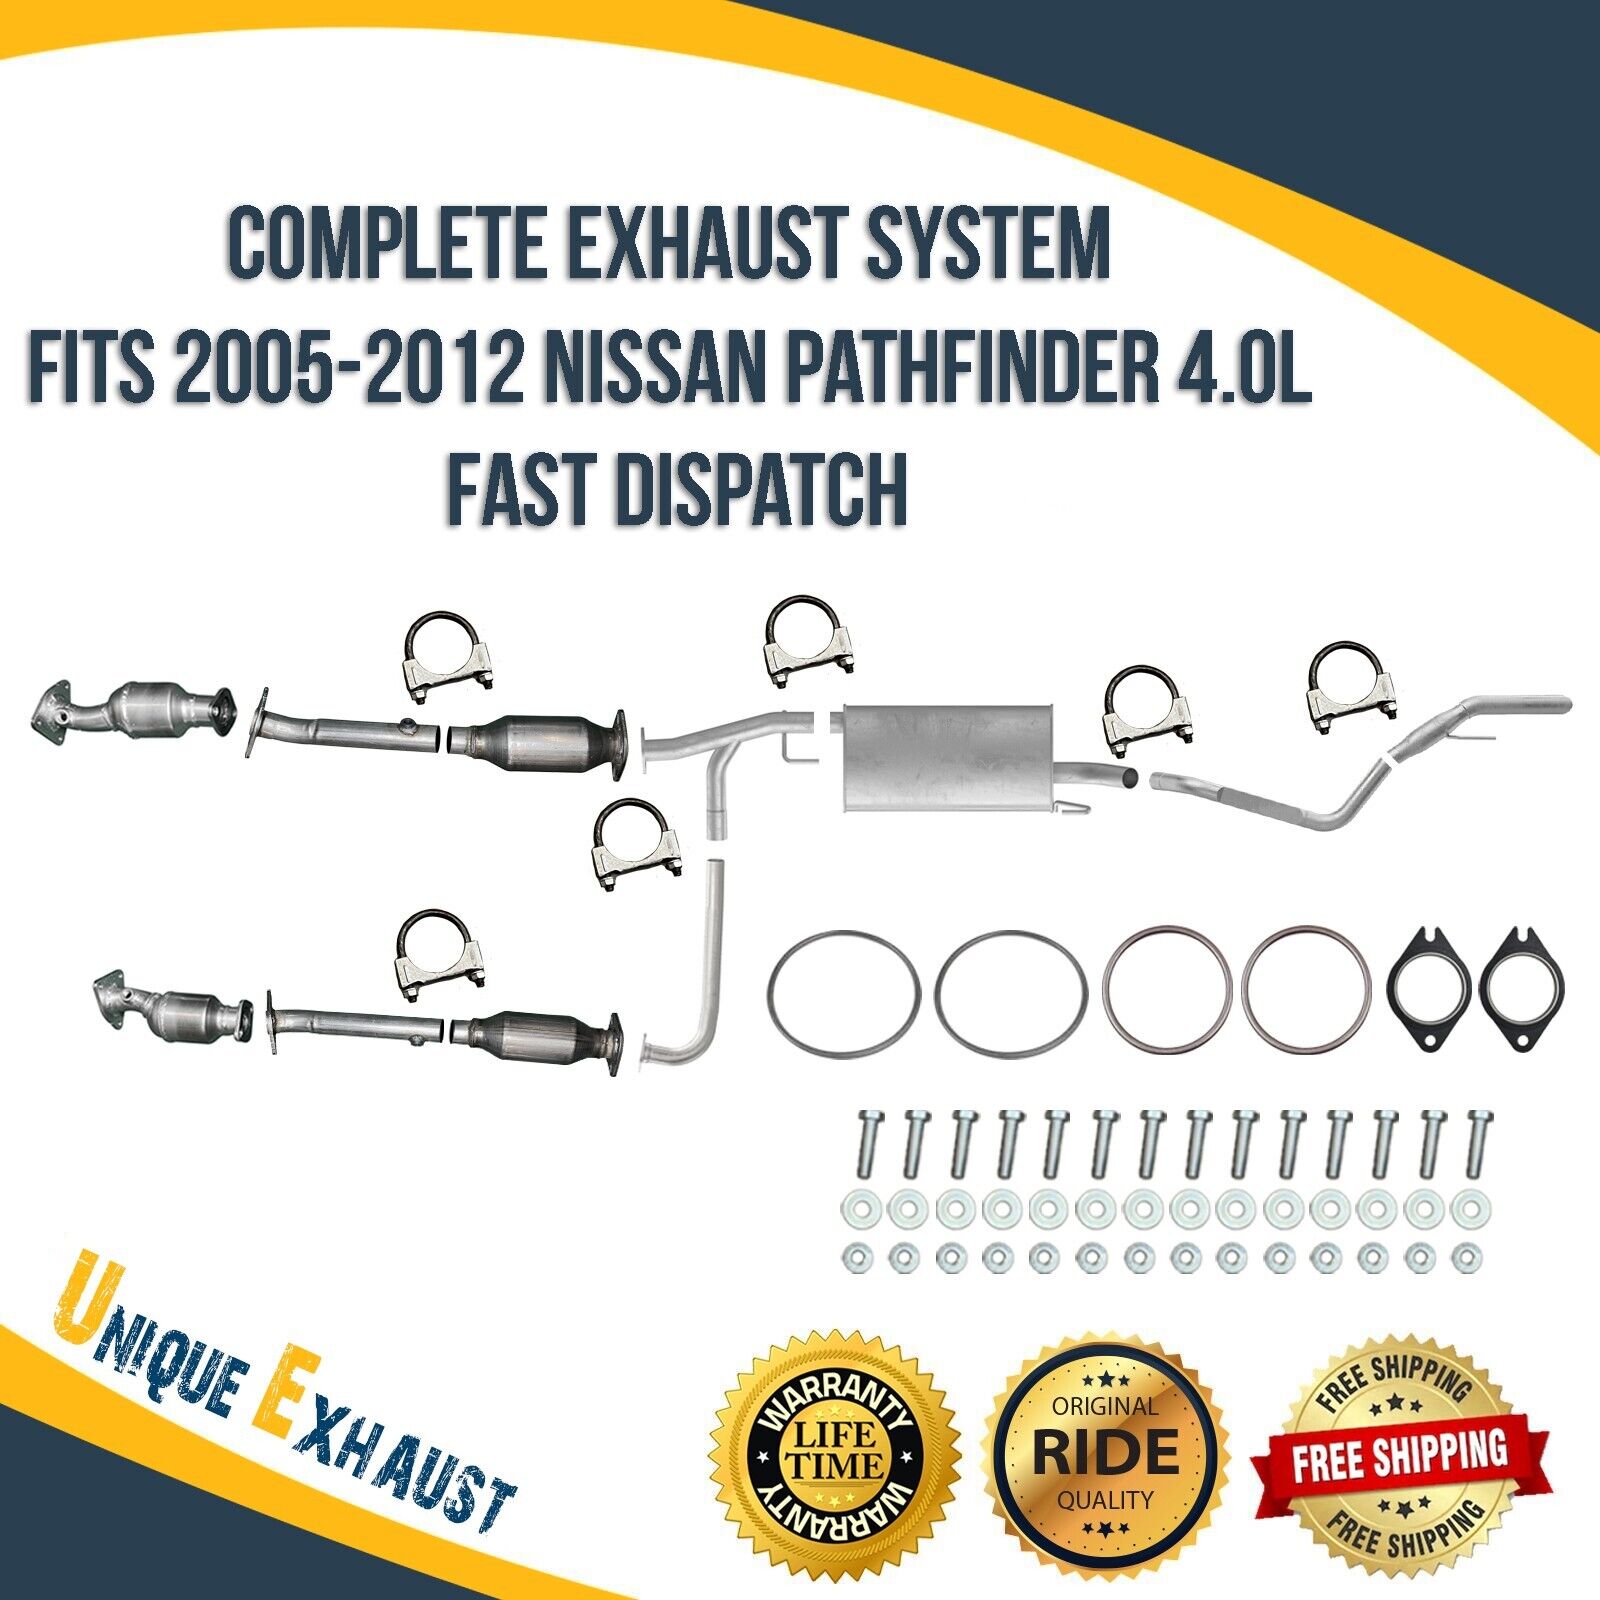 Complete Exhaust System Fits 2005-2012 Nissan Pathfinder 4.0L Fast Dispatch